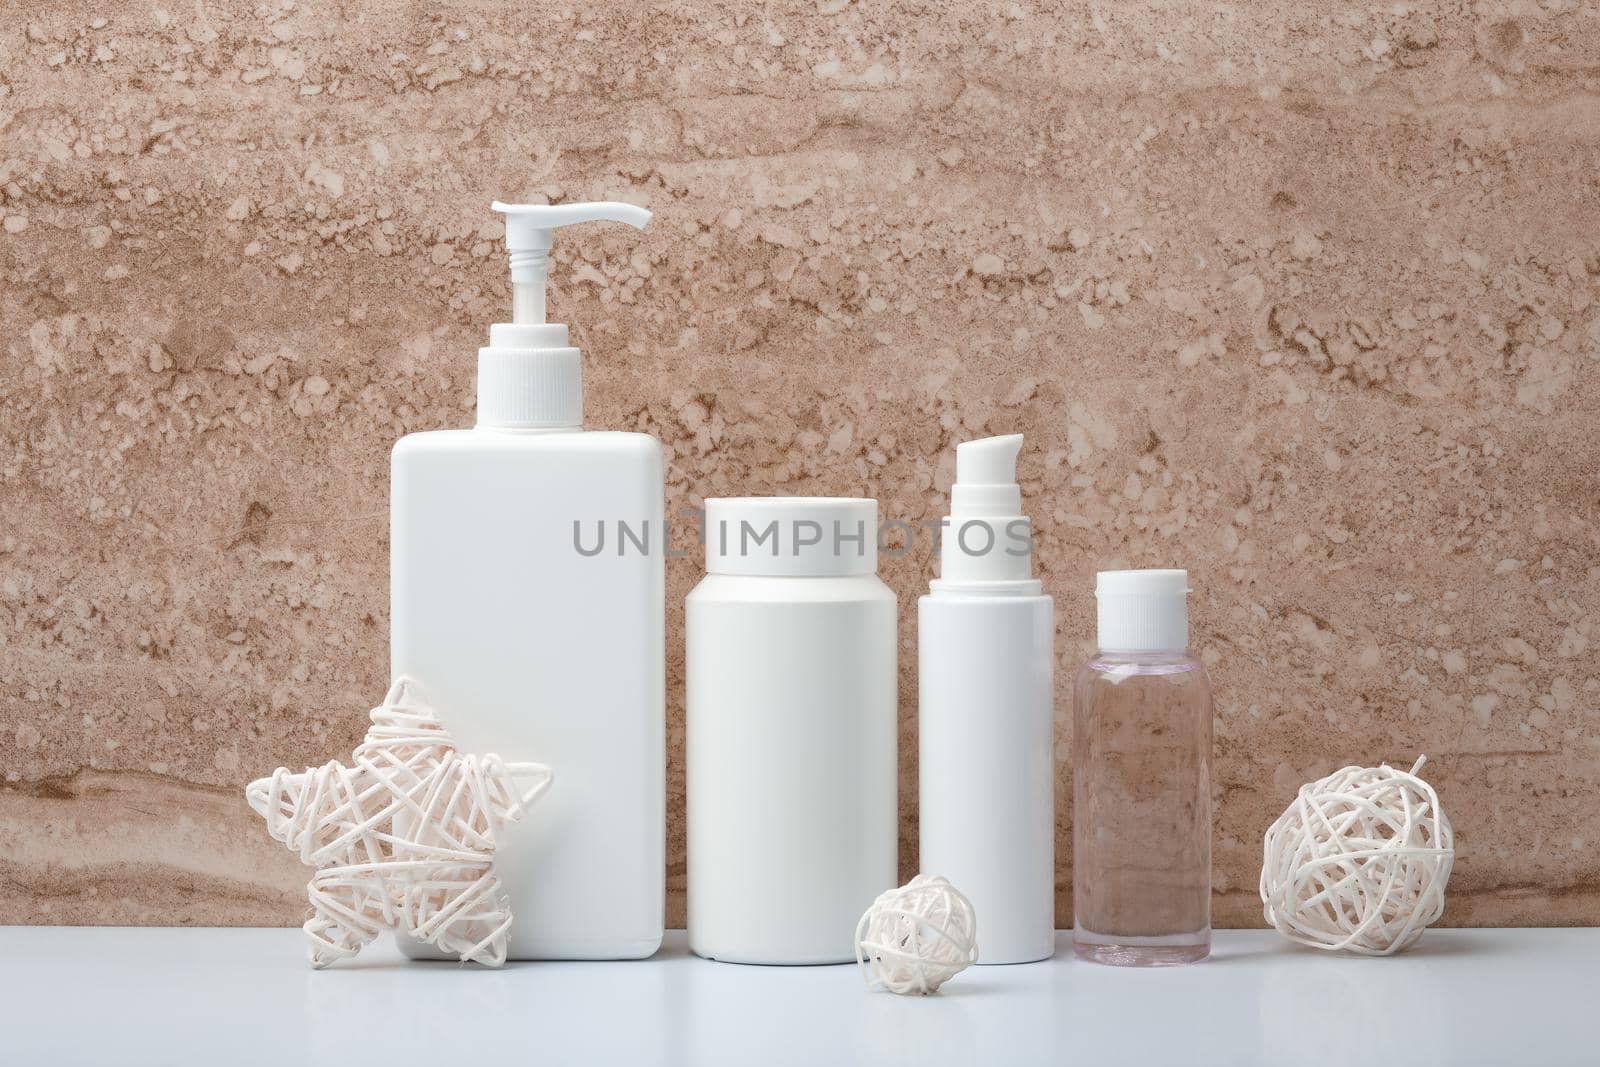 Body cream, scrub, face cream and lotion in white unbranded tubes against beige marble background